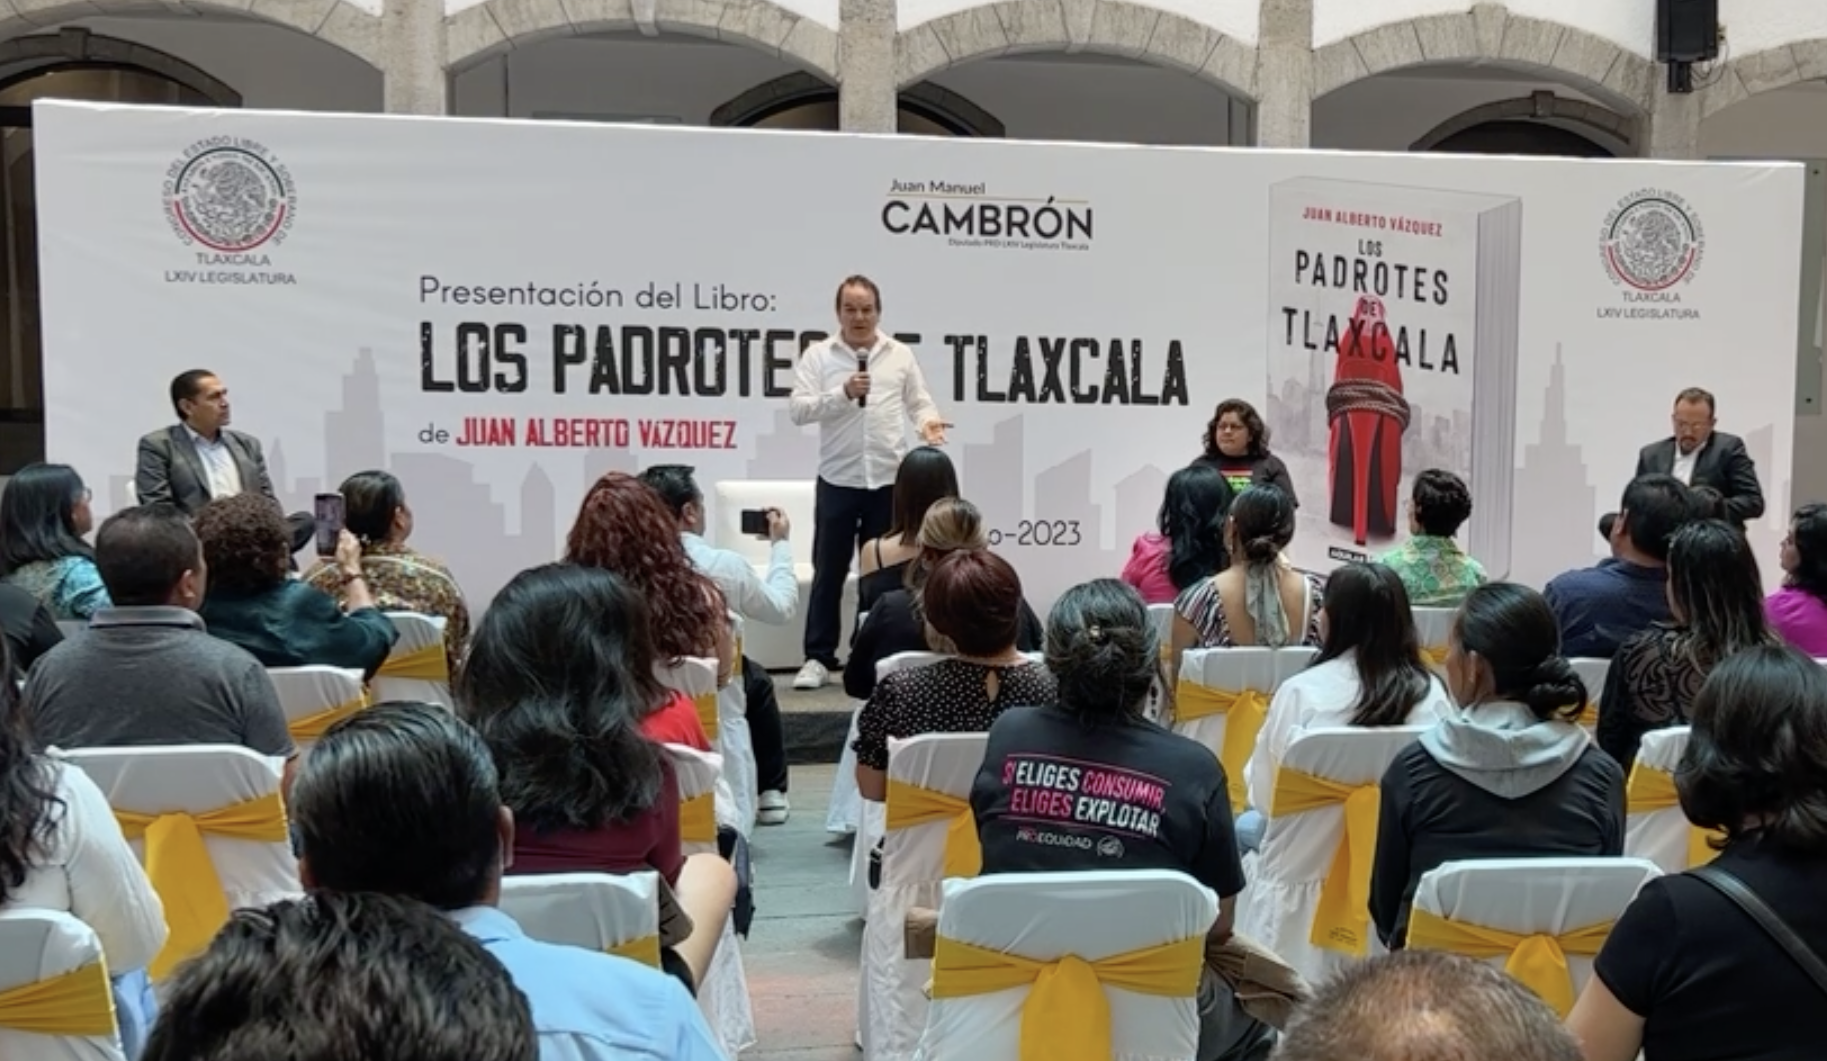 Mexican journalist Juan Alberto Vázquez talks during the presentation of his book "Los Padrotes de Tlaxcala" in the Tlaxcala state Congress, in Mexico.